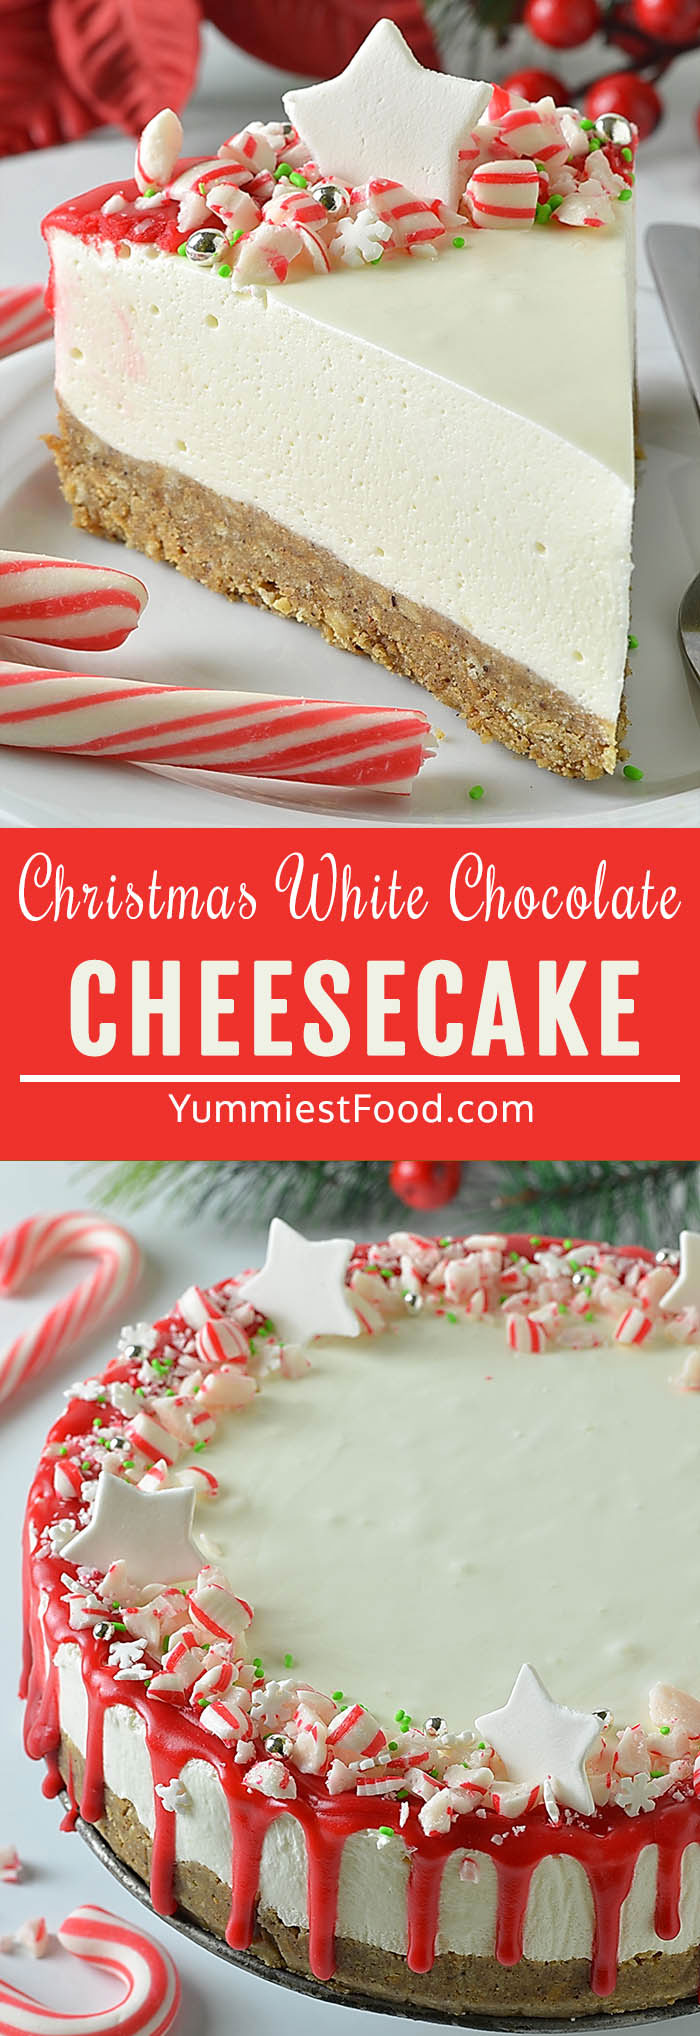 Christmas White Chocolate Cheesecake - Amazing Christmas Cheesecake to make your Holiday season as delicious and magical as you imagine! Simple to make and deliciously creamy with a crumbly Gingerbread crust, white chocolate filling and more! #christmas #christmasrecipes #dessertrecipes #dessertfoodrecipes #easyrecipes #chocolate #cheesecakerecipes #cheesecake